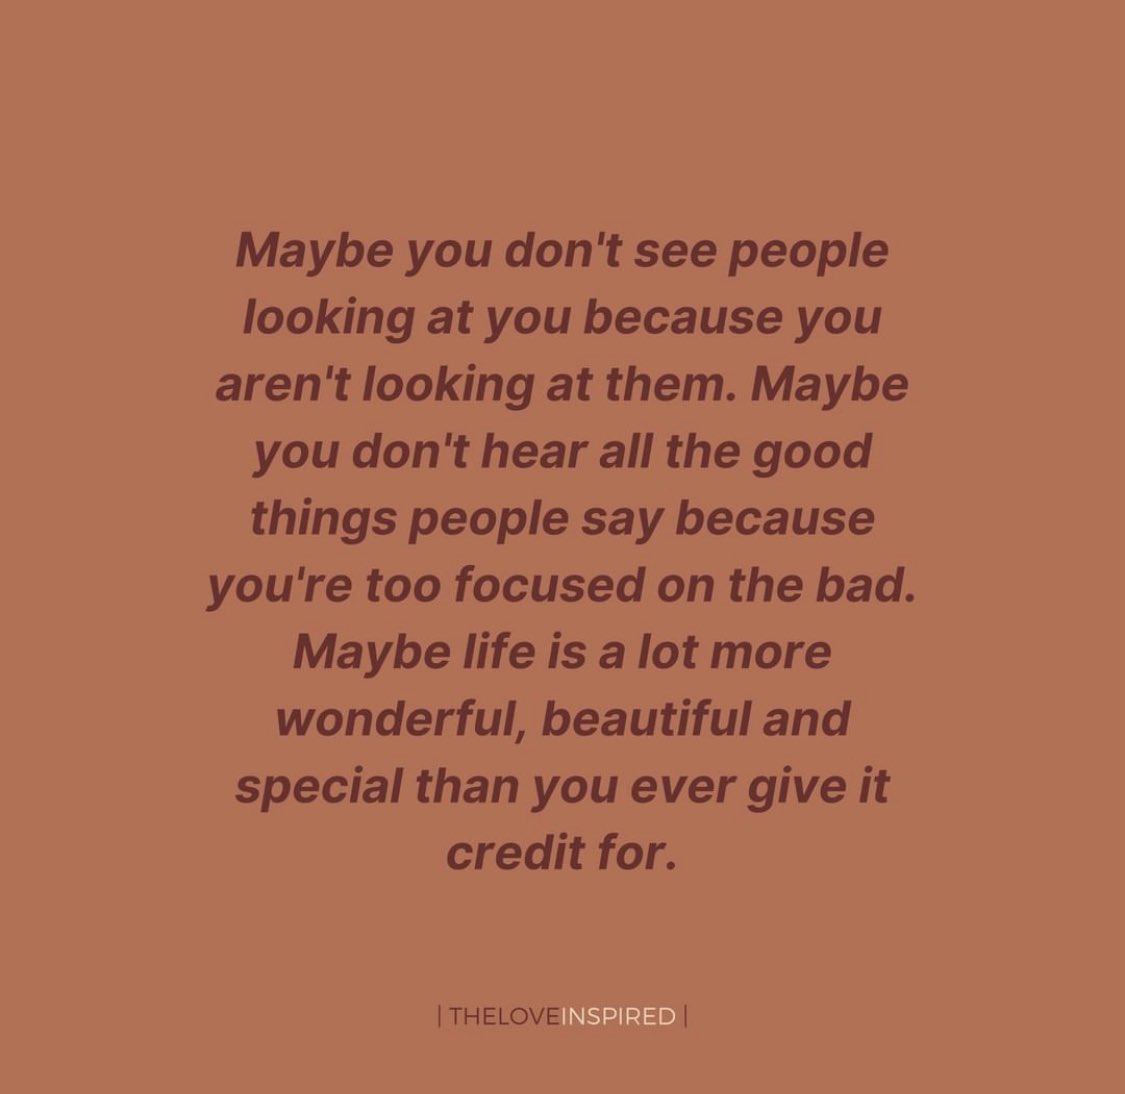 “maybe life is a lot more wonderful, beautiful and special than you ever give it credit for”